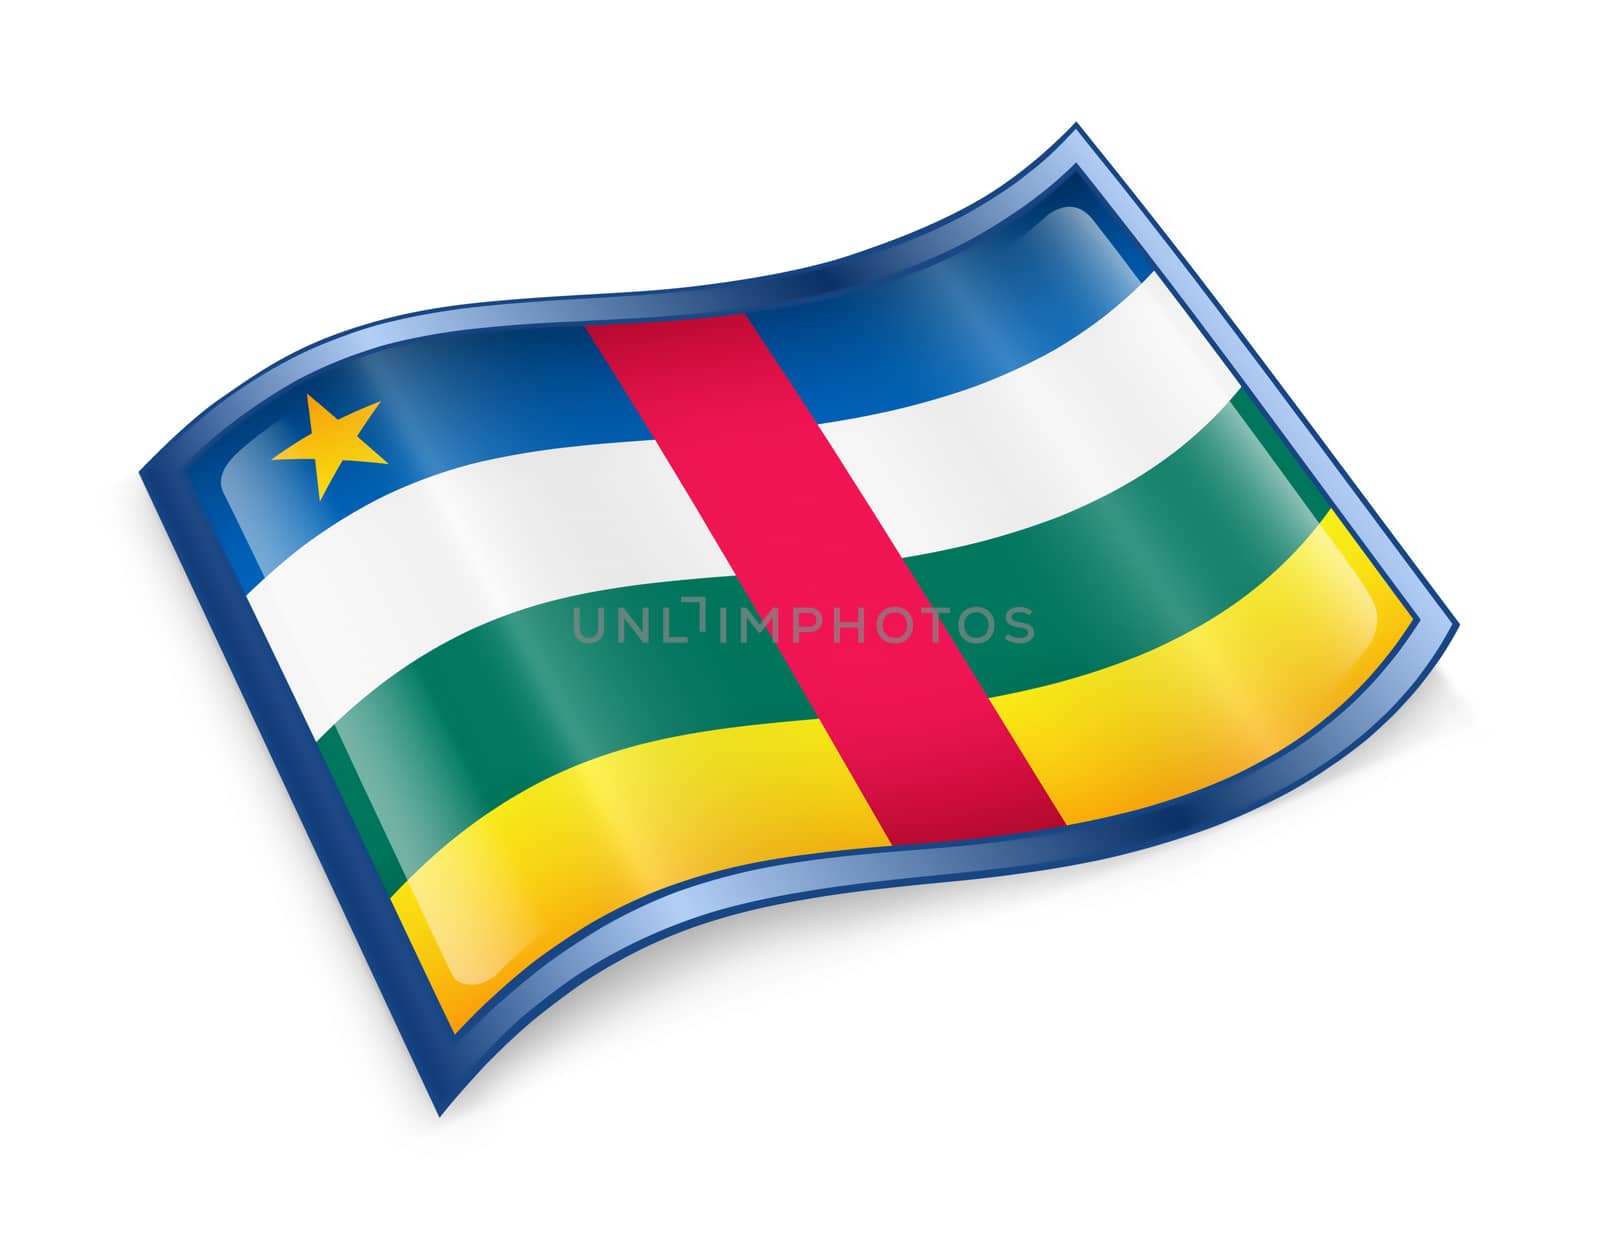 Central African Republic Flag icon, isolated on white background.